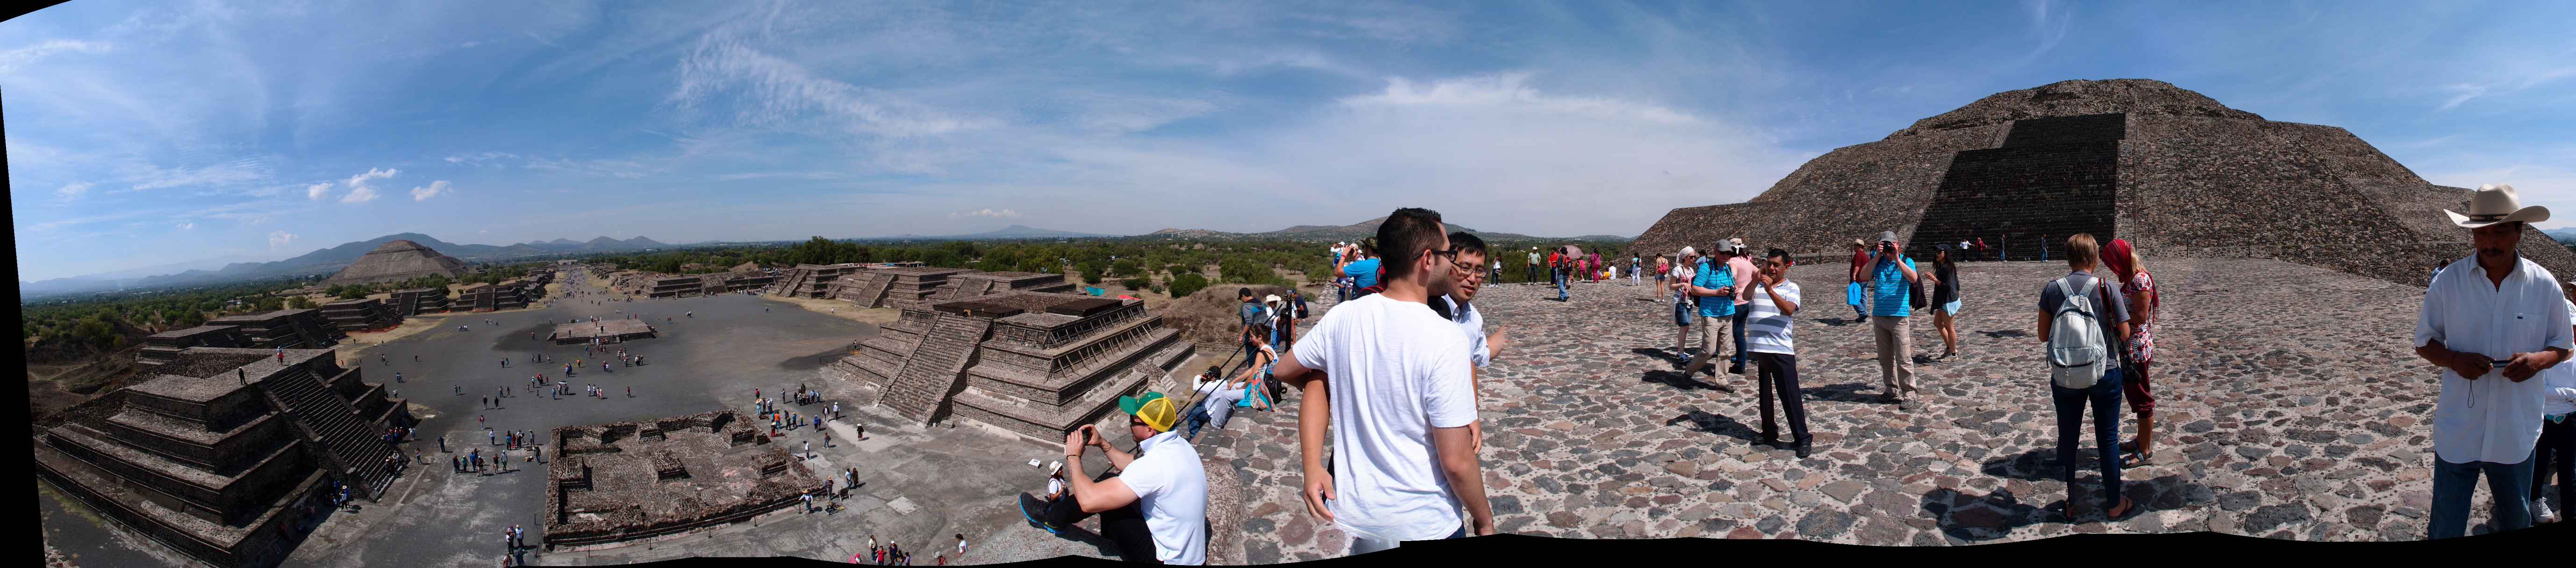 mexique,teotihuacan